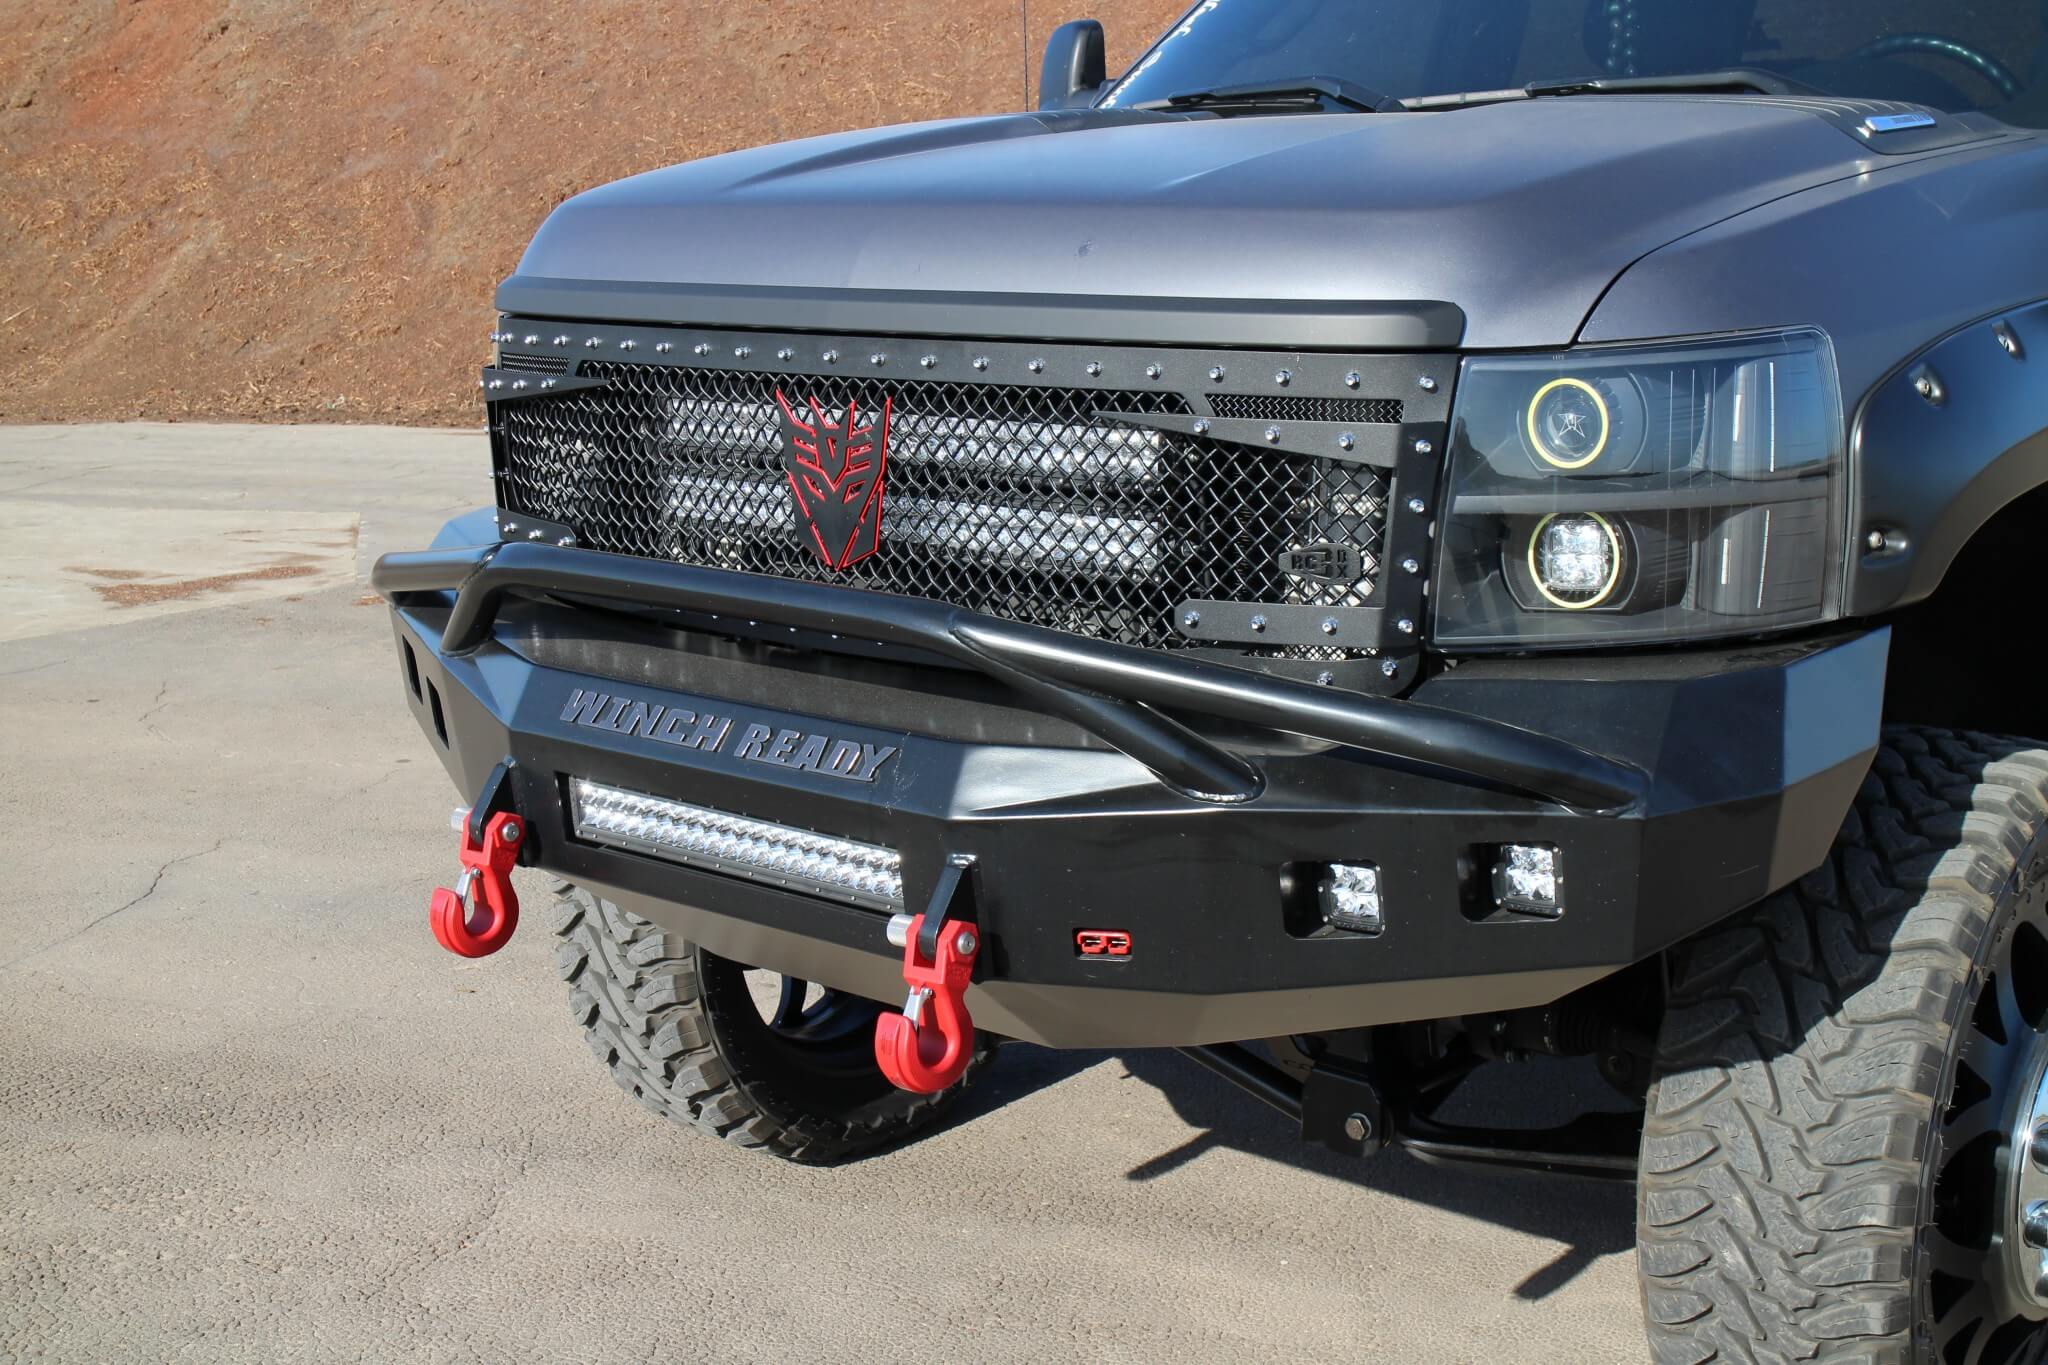 The leading edge was equipped with a Winch Ready prerunner bumper fitted with Monster recovery hooks and a Rigid Industries 20-inch E series LED light bar with four dually LEDs. A Royalty Core RC2 grille is flanked by a pair of Plain an Simple projector/halo HID headlights.